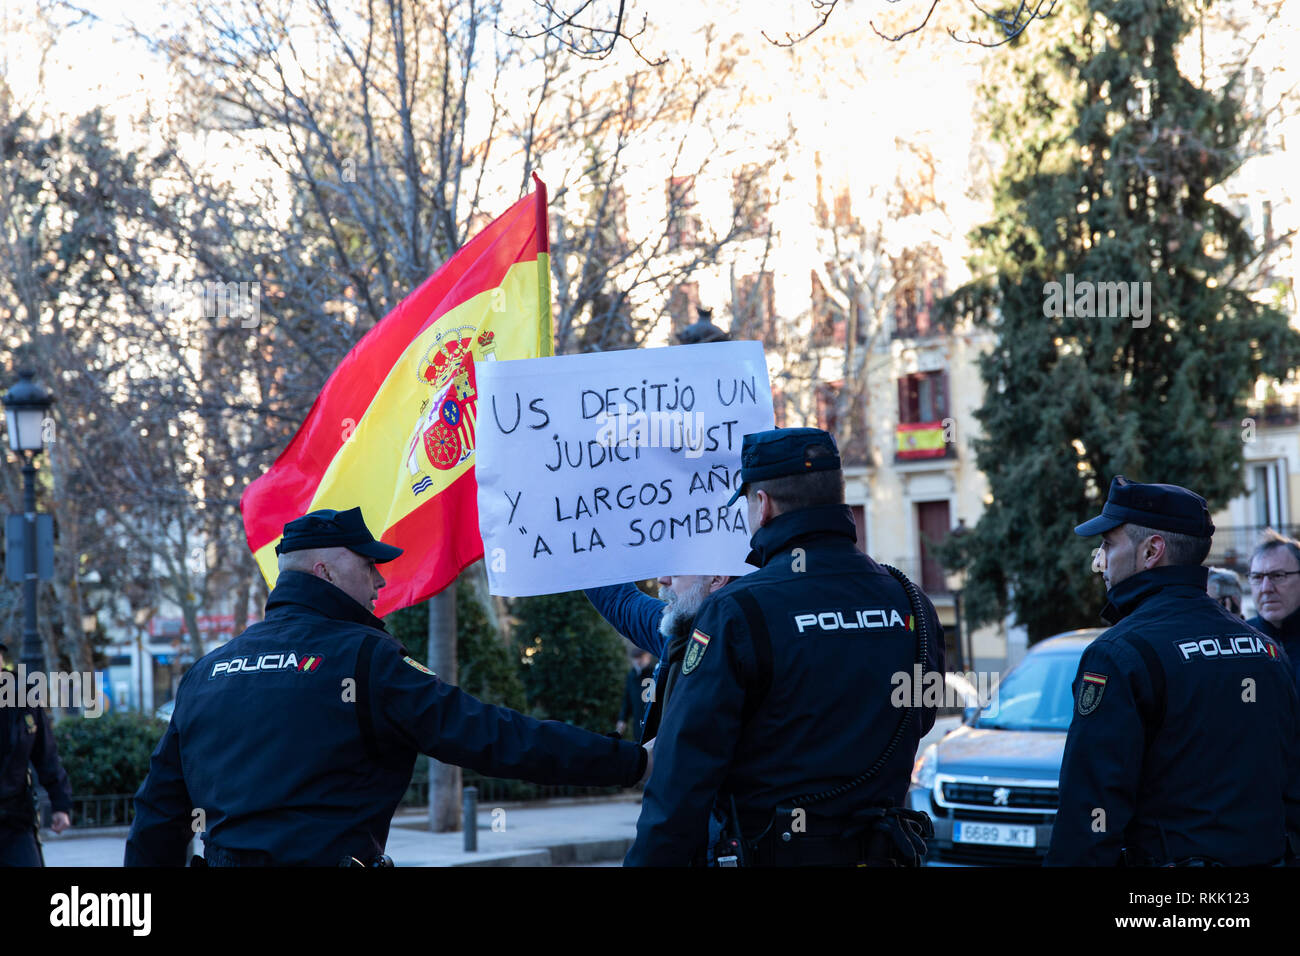 Madrid, Spain. 12th Feb, 2019. Protests in the vicinity of the Supreme Court. The Criminal Chamber of the Supreme Court begins this Tuesday, February 12, judging 12 independence leaders by the so-called 'procés' in Catalonia. Credit: Jesús Hellin/Alamy Live News Stock Photo